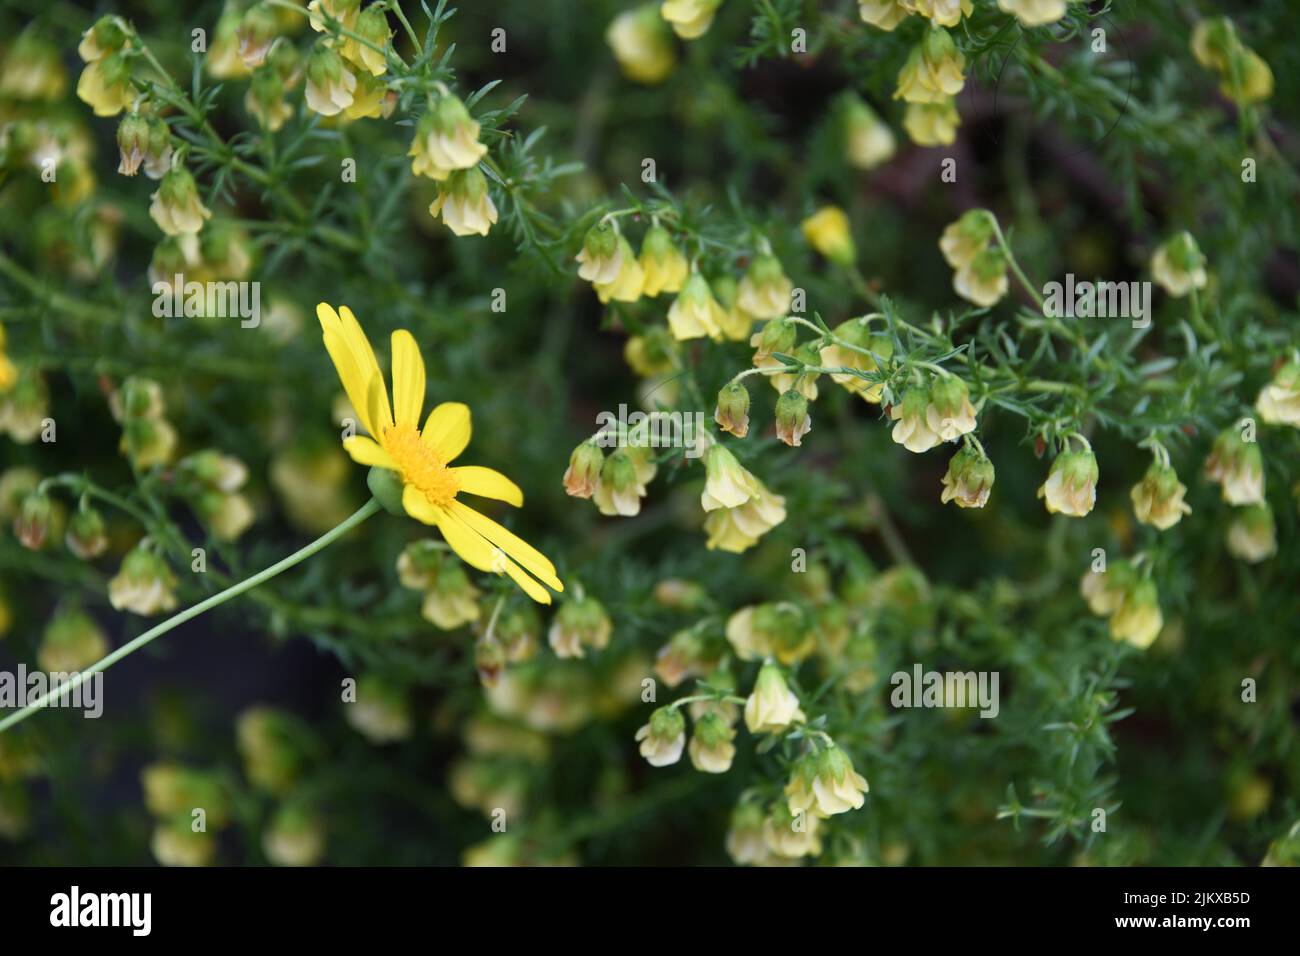 A closeup shot of African Bush Daisy flowers in a garden with green leaves Stock Photo